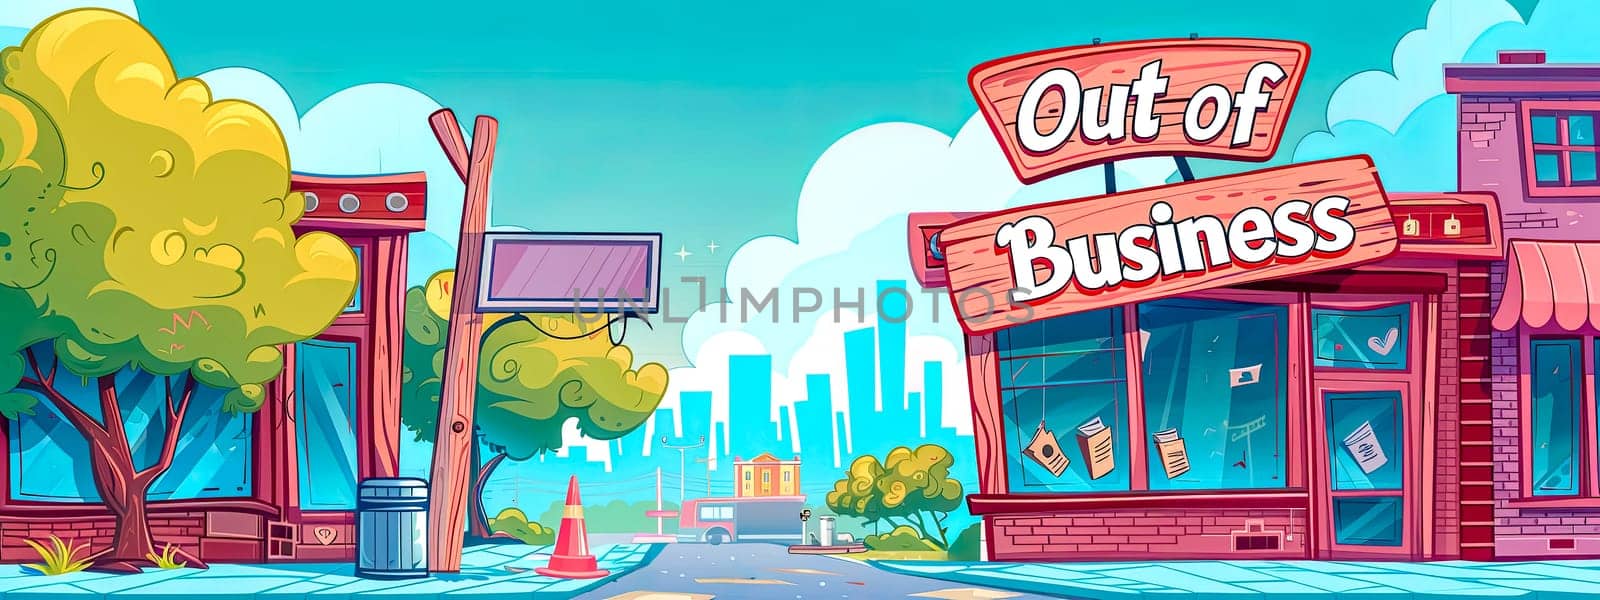 Colorful illustration of a vacant city street with 'out of business' signs and unoccupied ad spaces